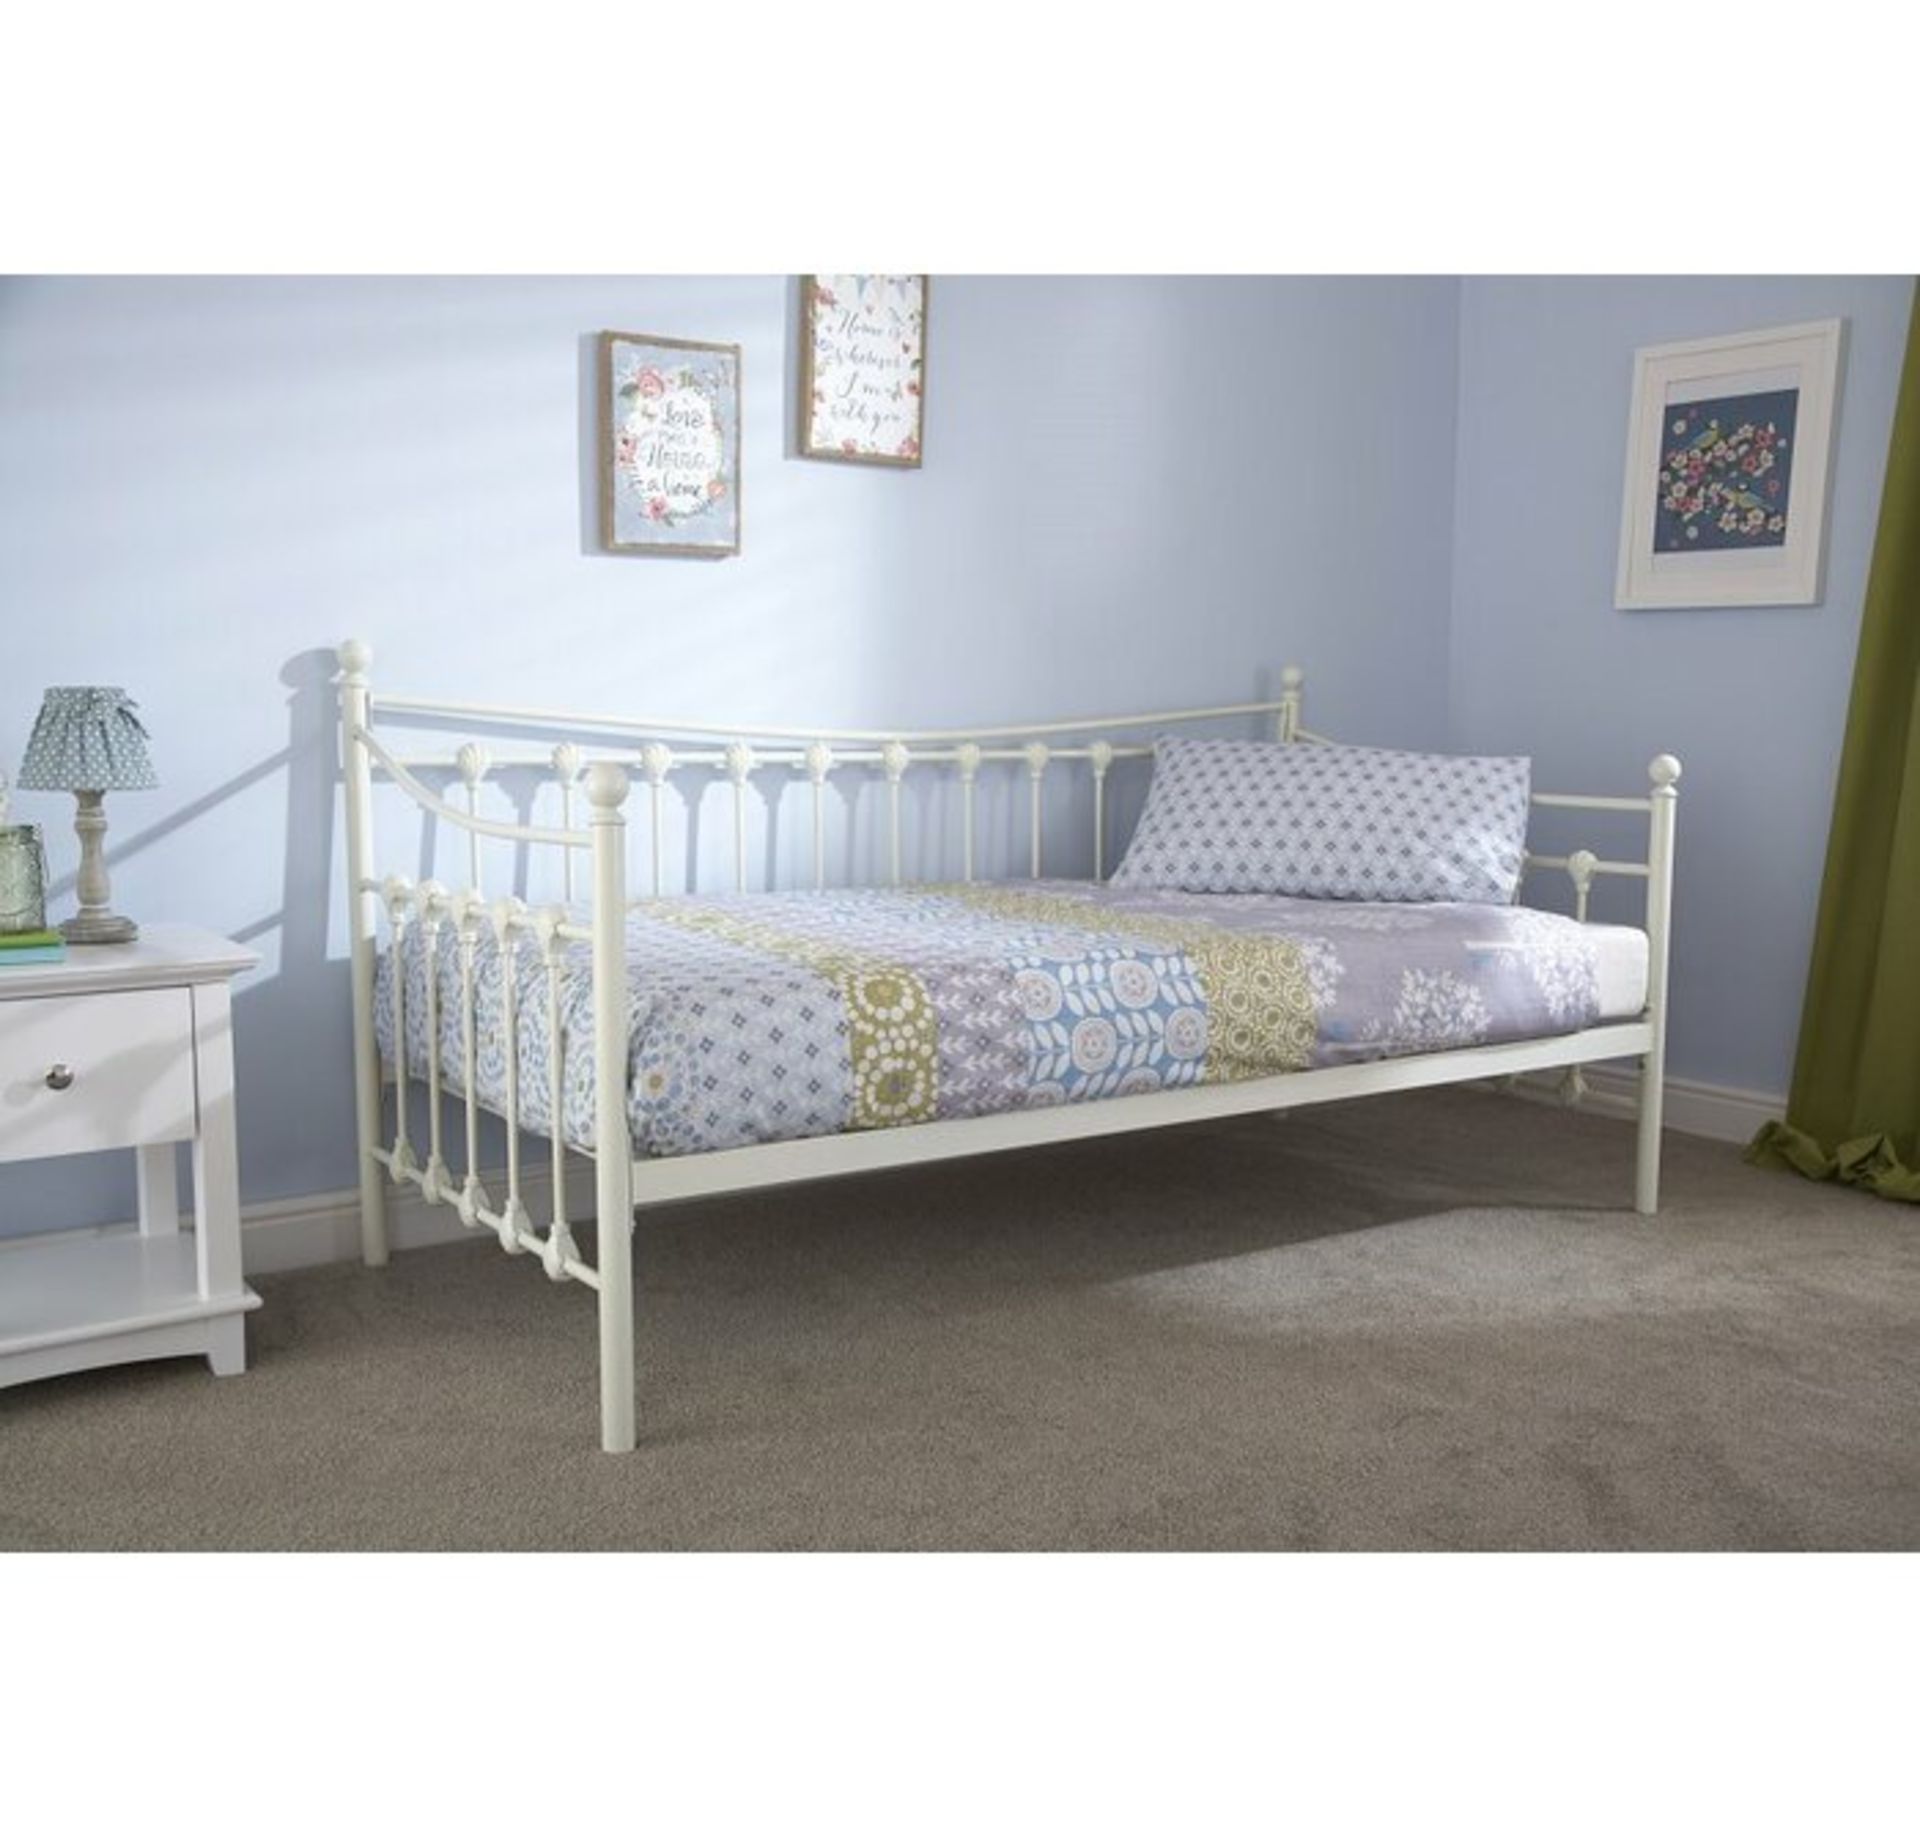 Bryland Bore Daybed Frame - RRP £165.00